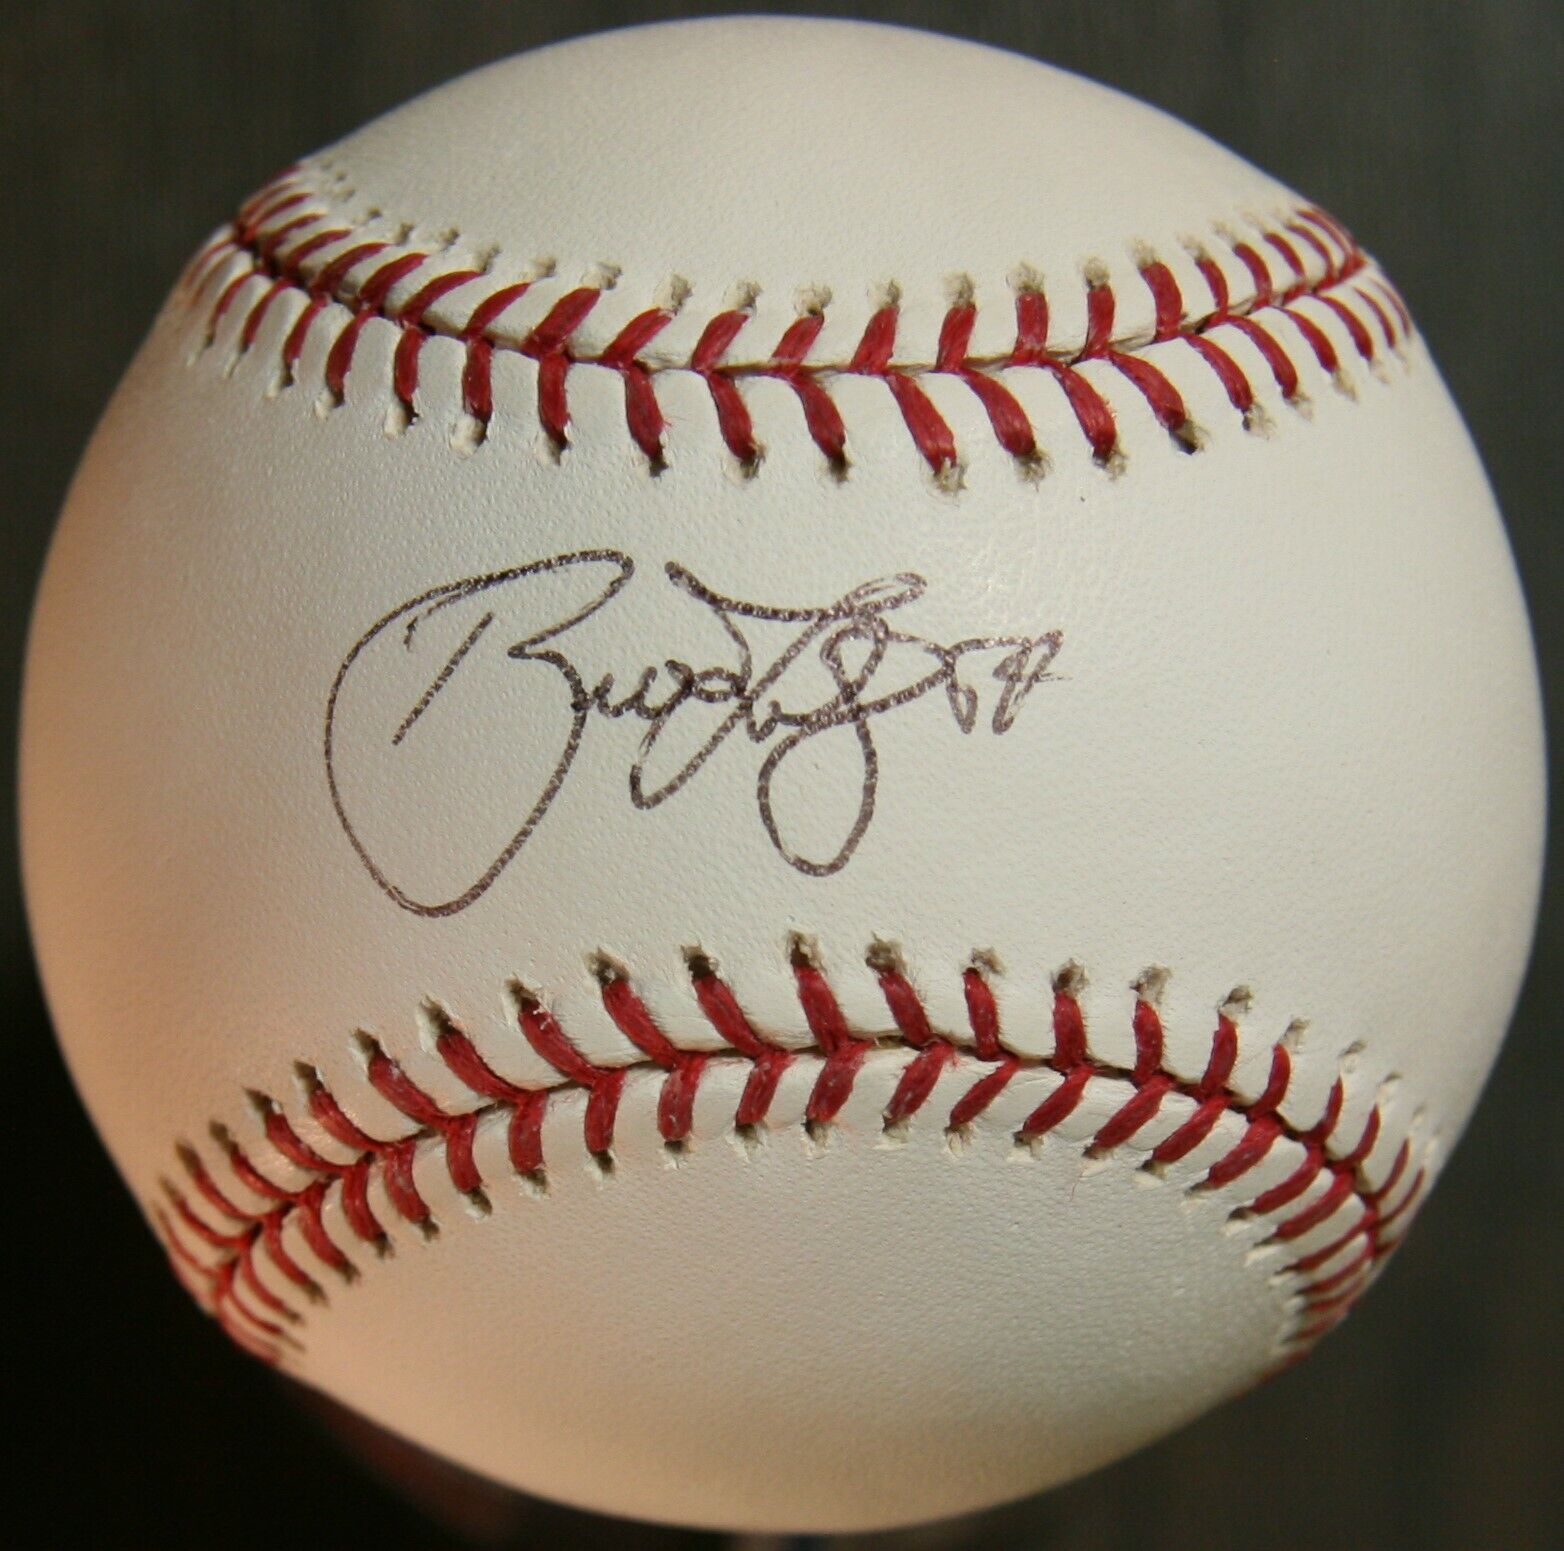 Brad Lidge Autographed Baseball, Phillies, includes a display cube